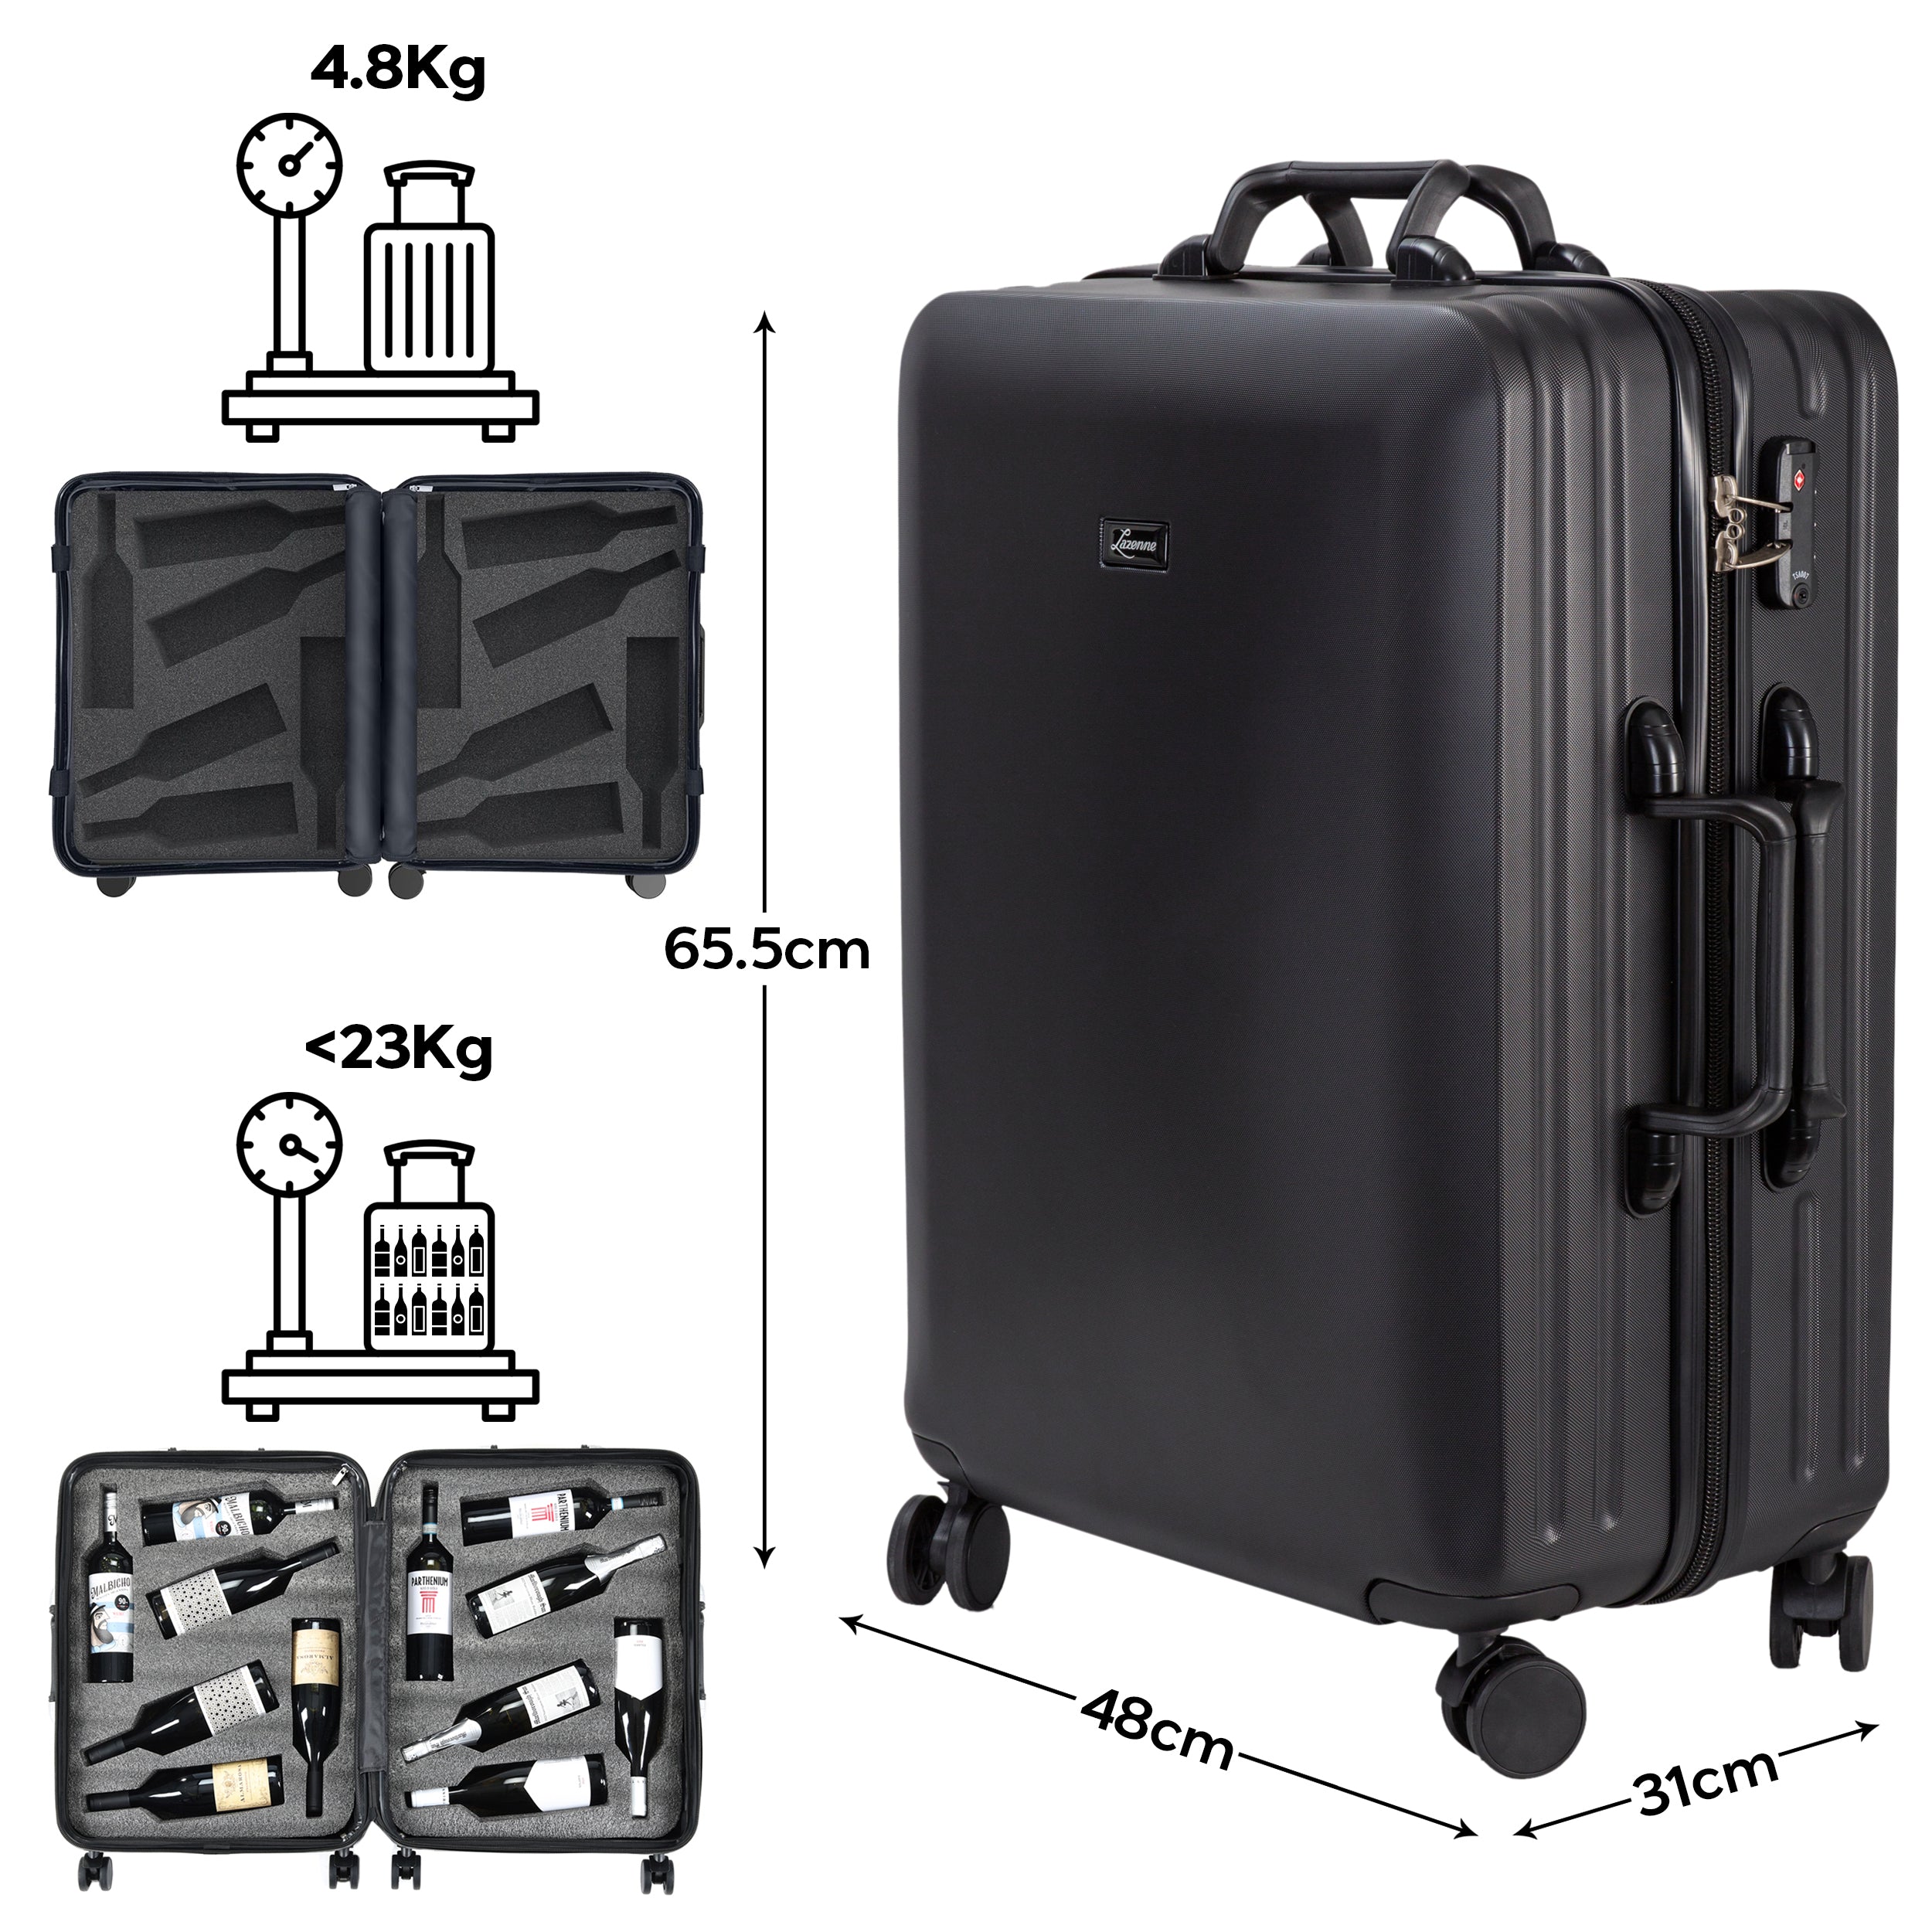 LAZENNE WINE TRAVEL SUITCASE 12 BOTTLES WITH REMOVABLE INSERTS - TSA AIRLINE APPROVED, 10-YEARS WARRANTY